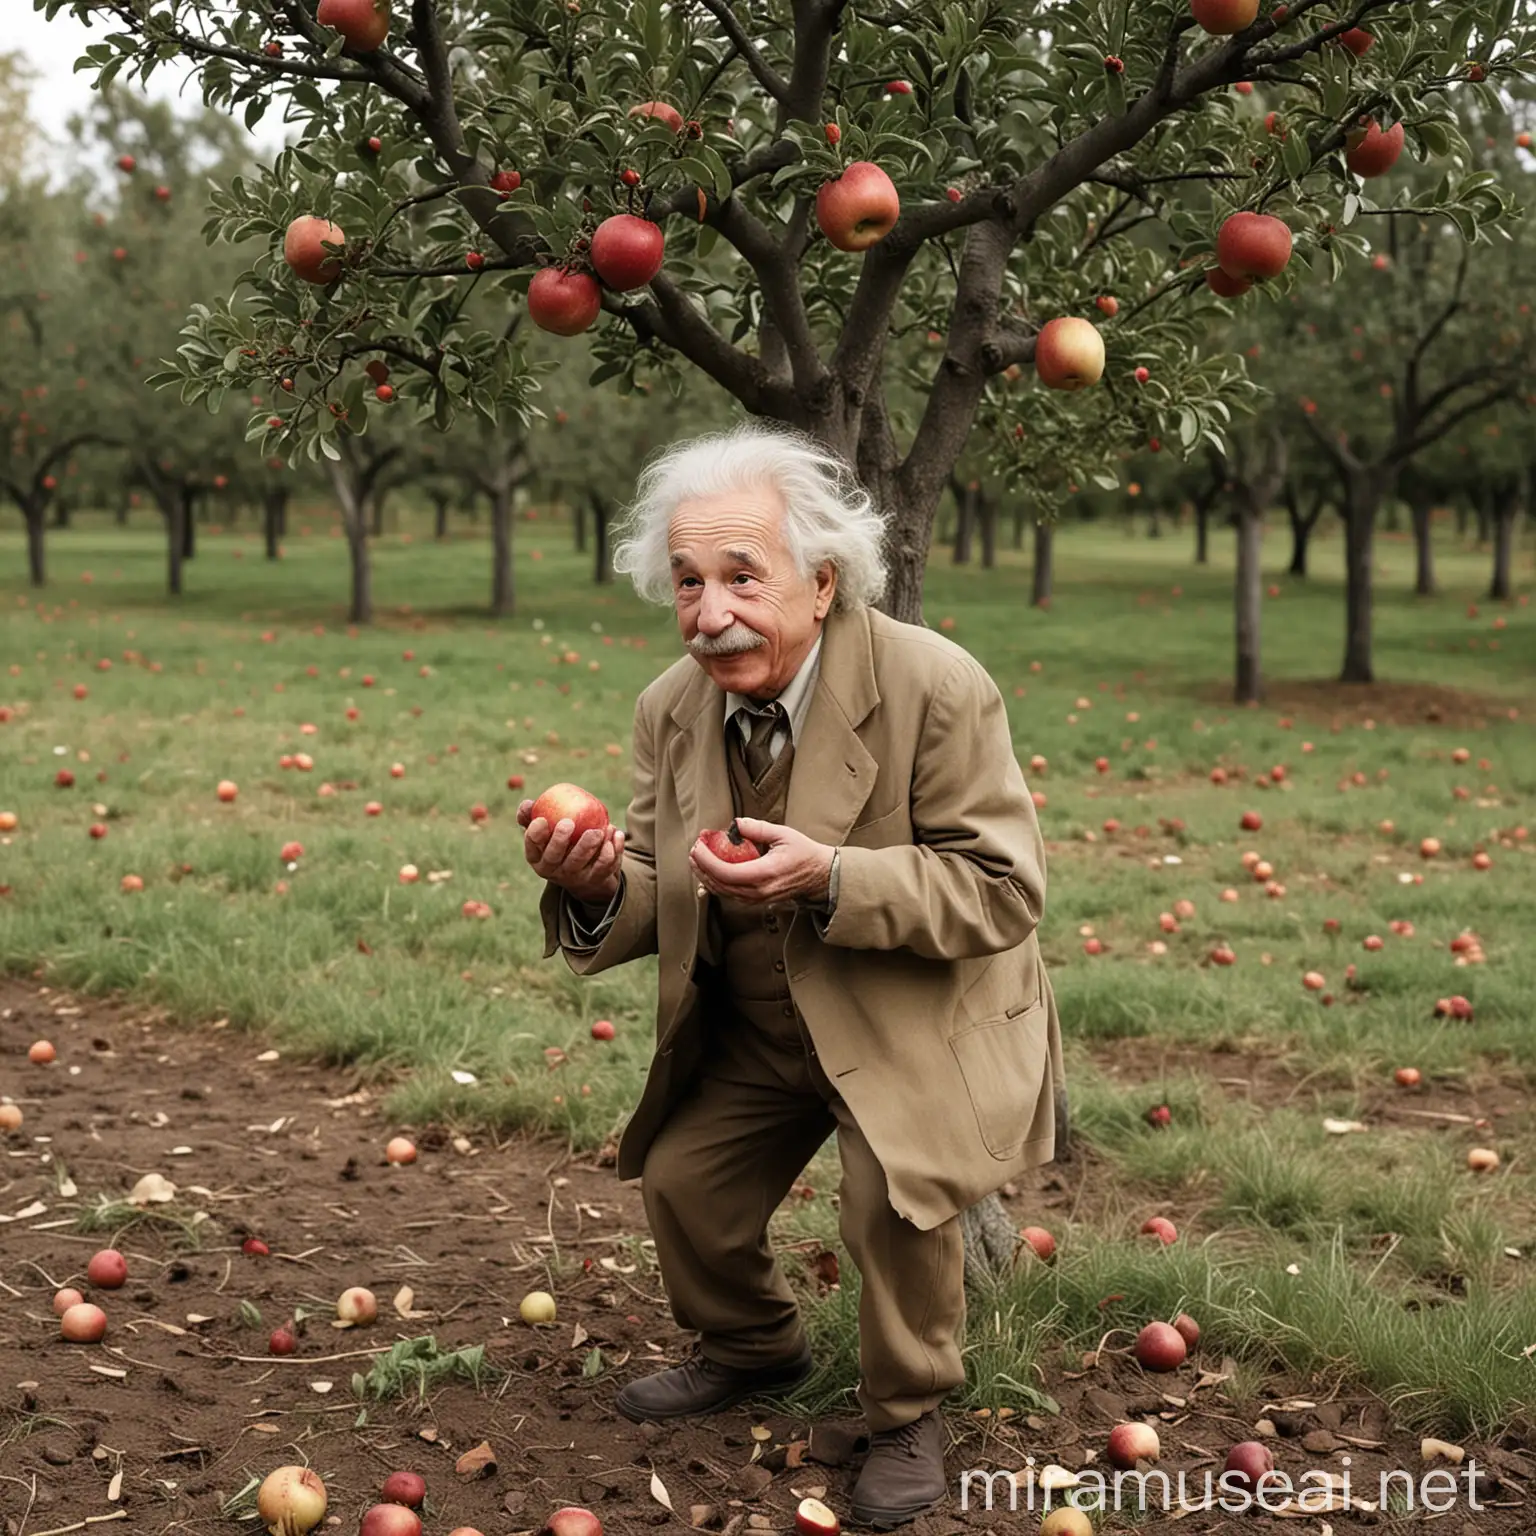 Einstein Contemplating Gravity Apple Falling from Tree